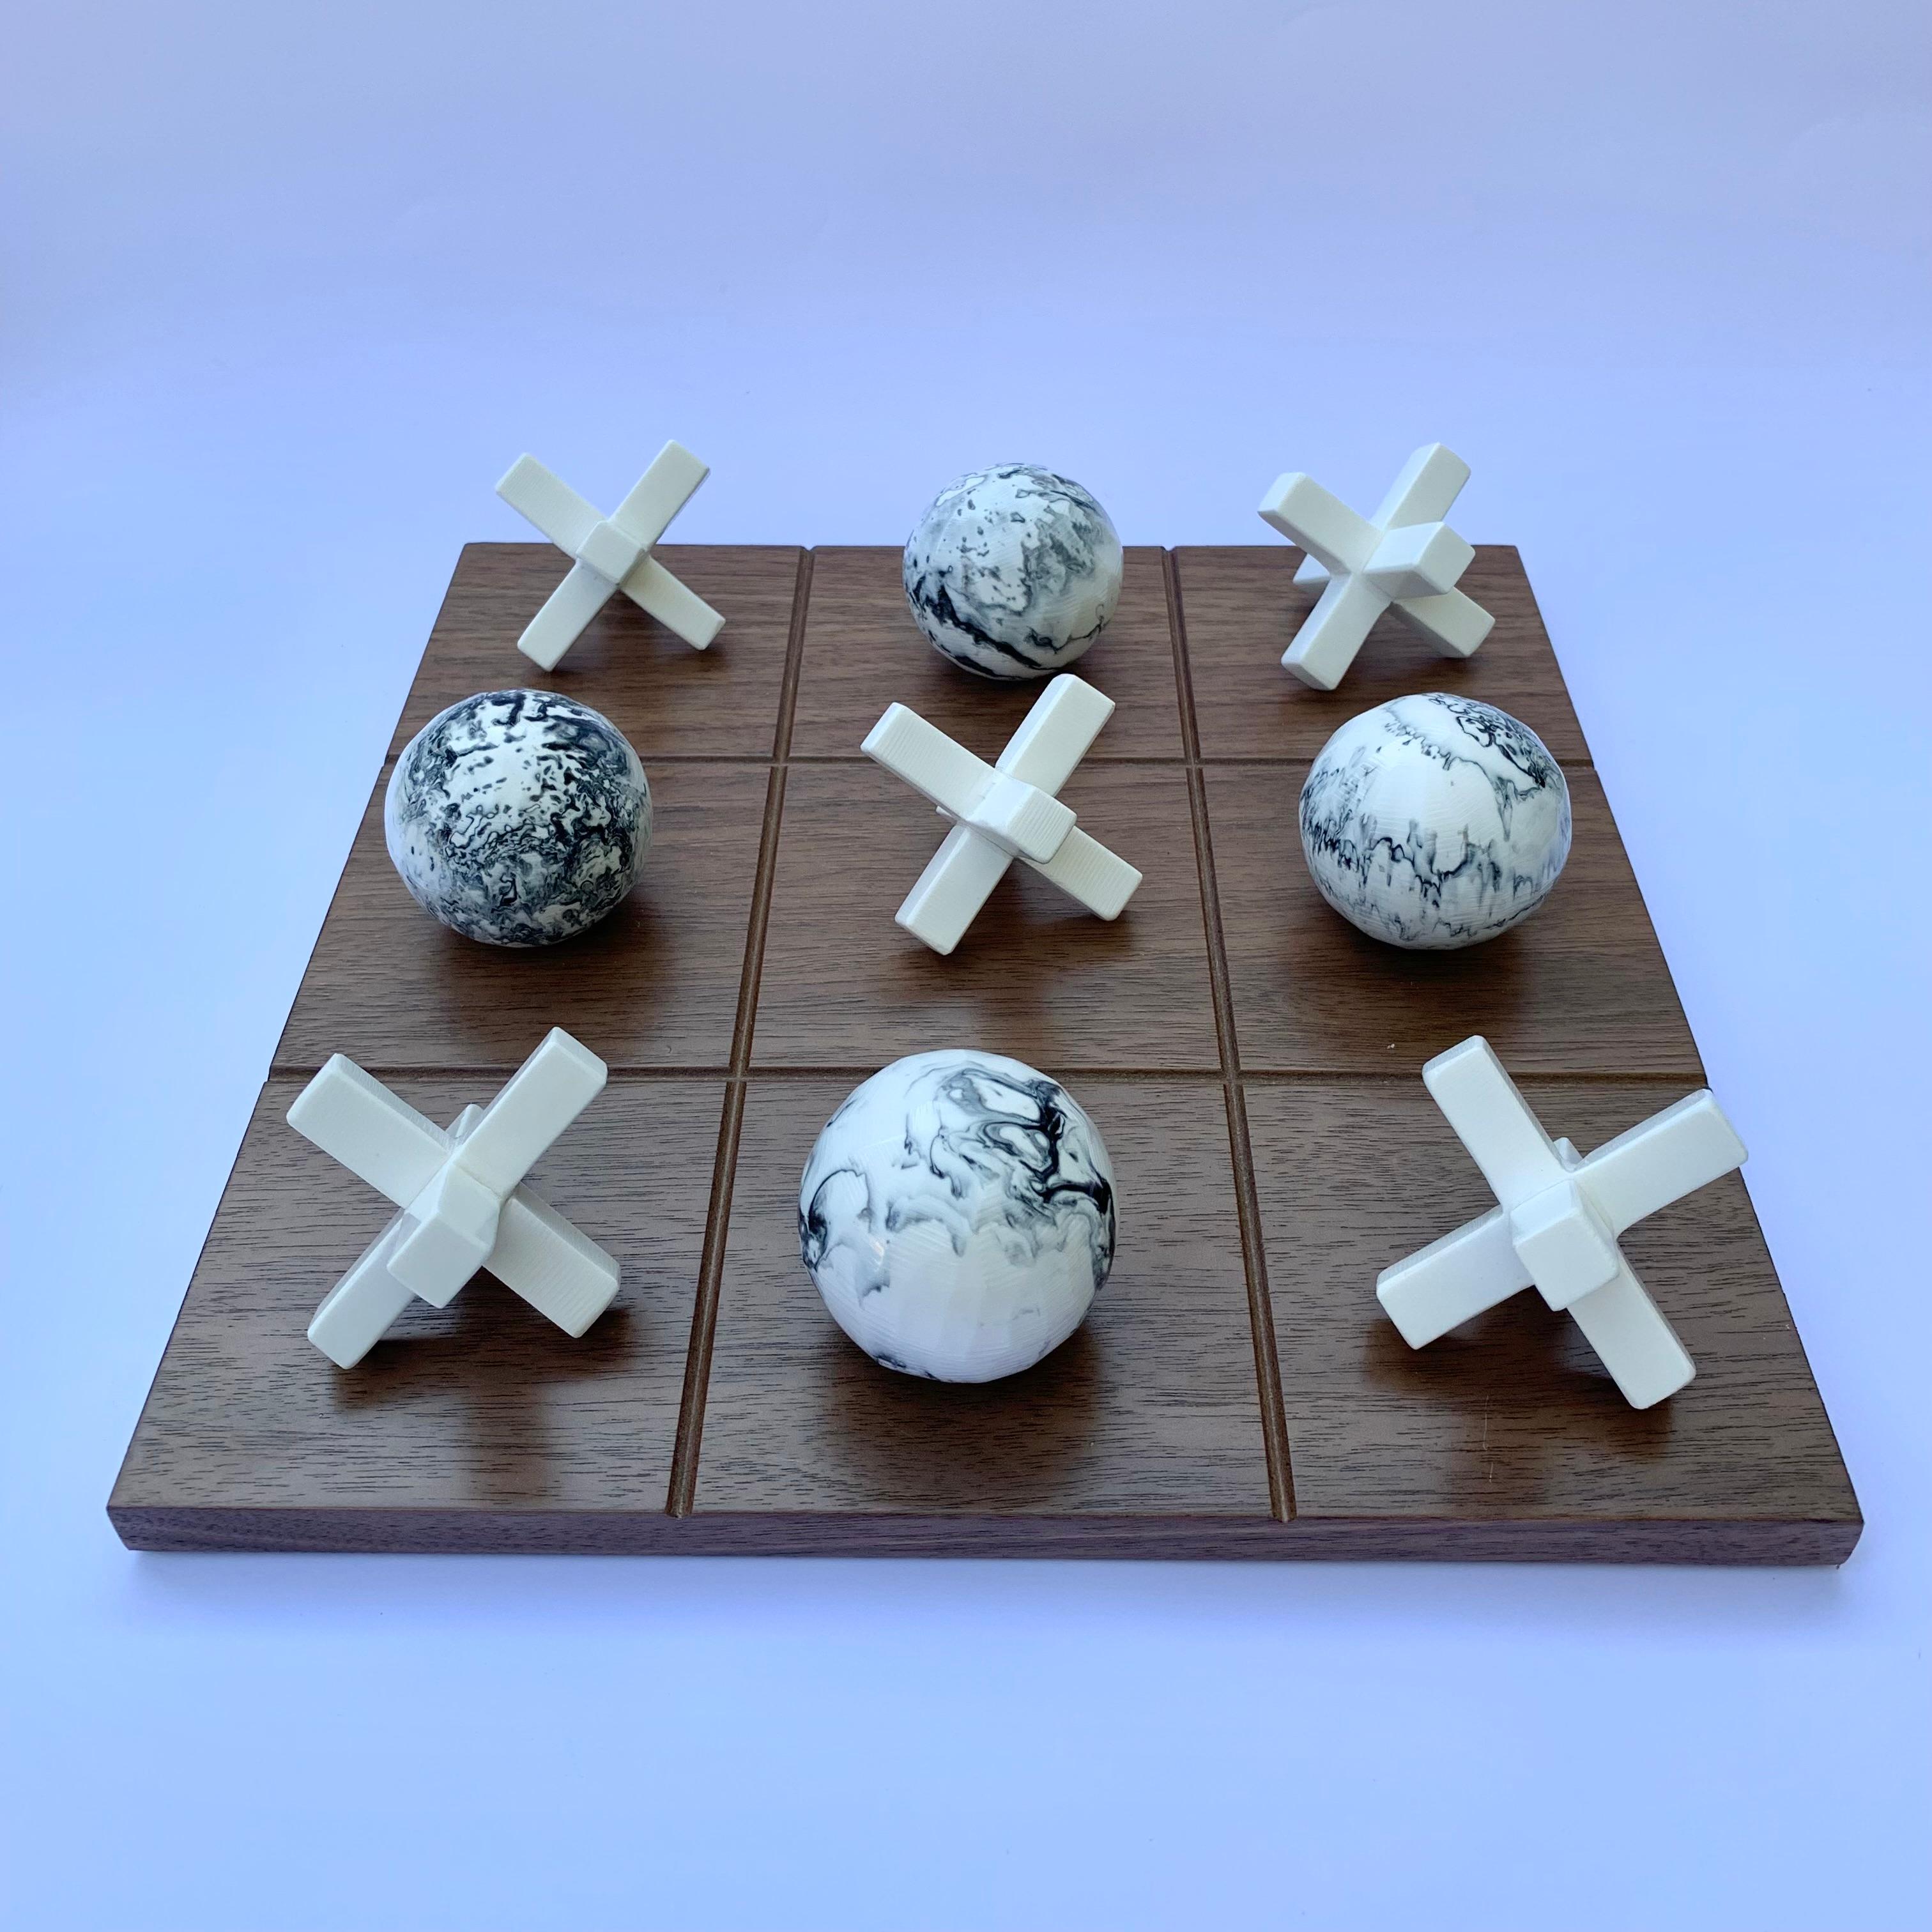 Our Tic Tac Toe is a beautiful, modern and fun take on the classic game. The three dimensional pieces are handmade in white resin with black marbled texture and the board is made of oak wood veneer. It will be the coolest statement piece on any